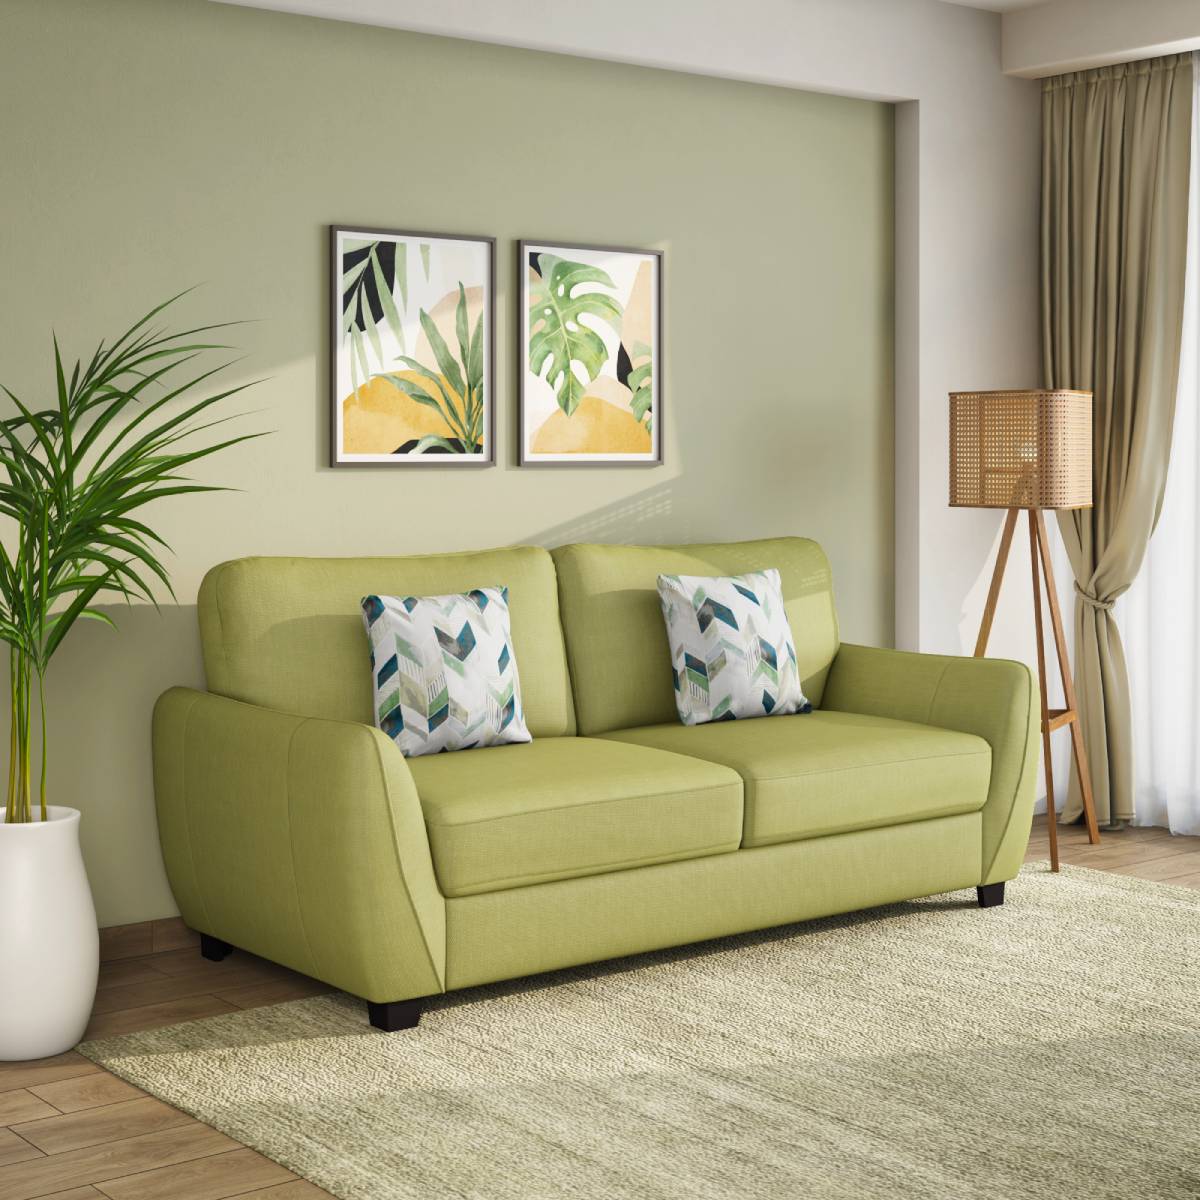 Buy Springfield 3 Seater Fabric Sofa (Light Olive Green)Online- At